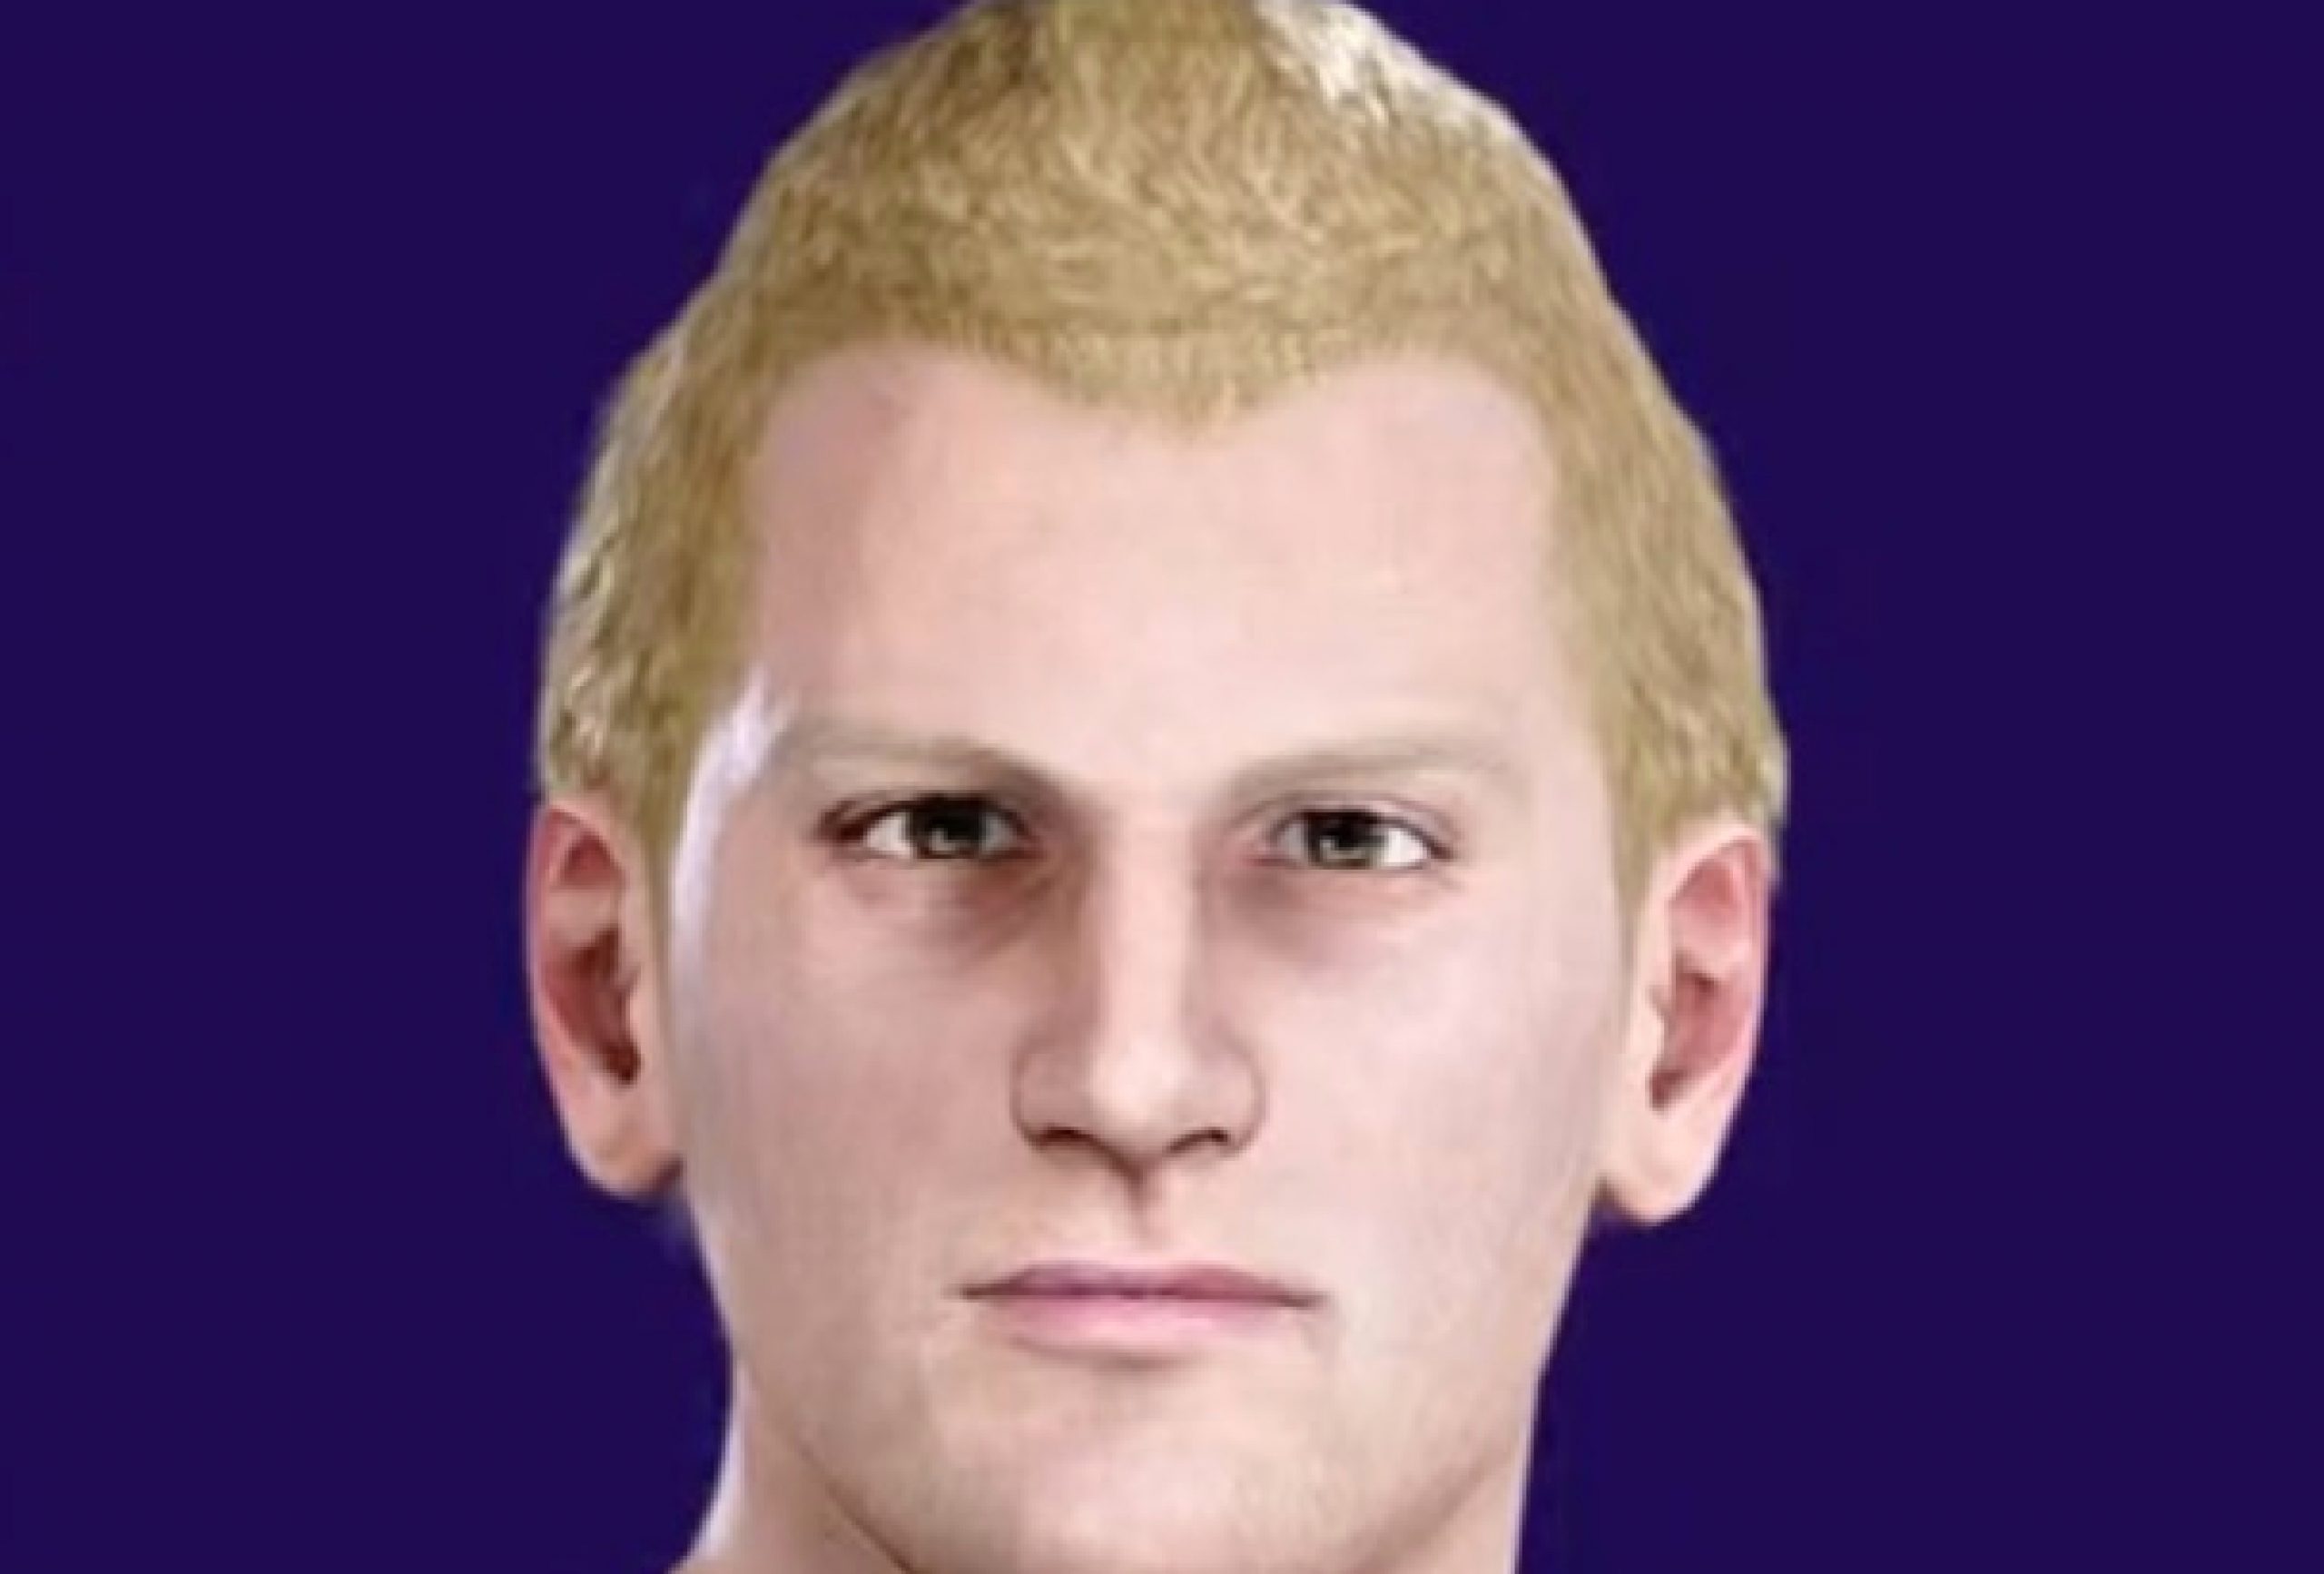 Konami have gone and absolutely butchered Leeds United players’ faces in PES 21